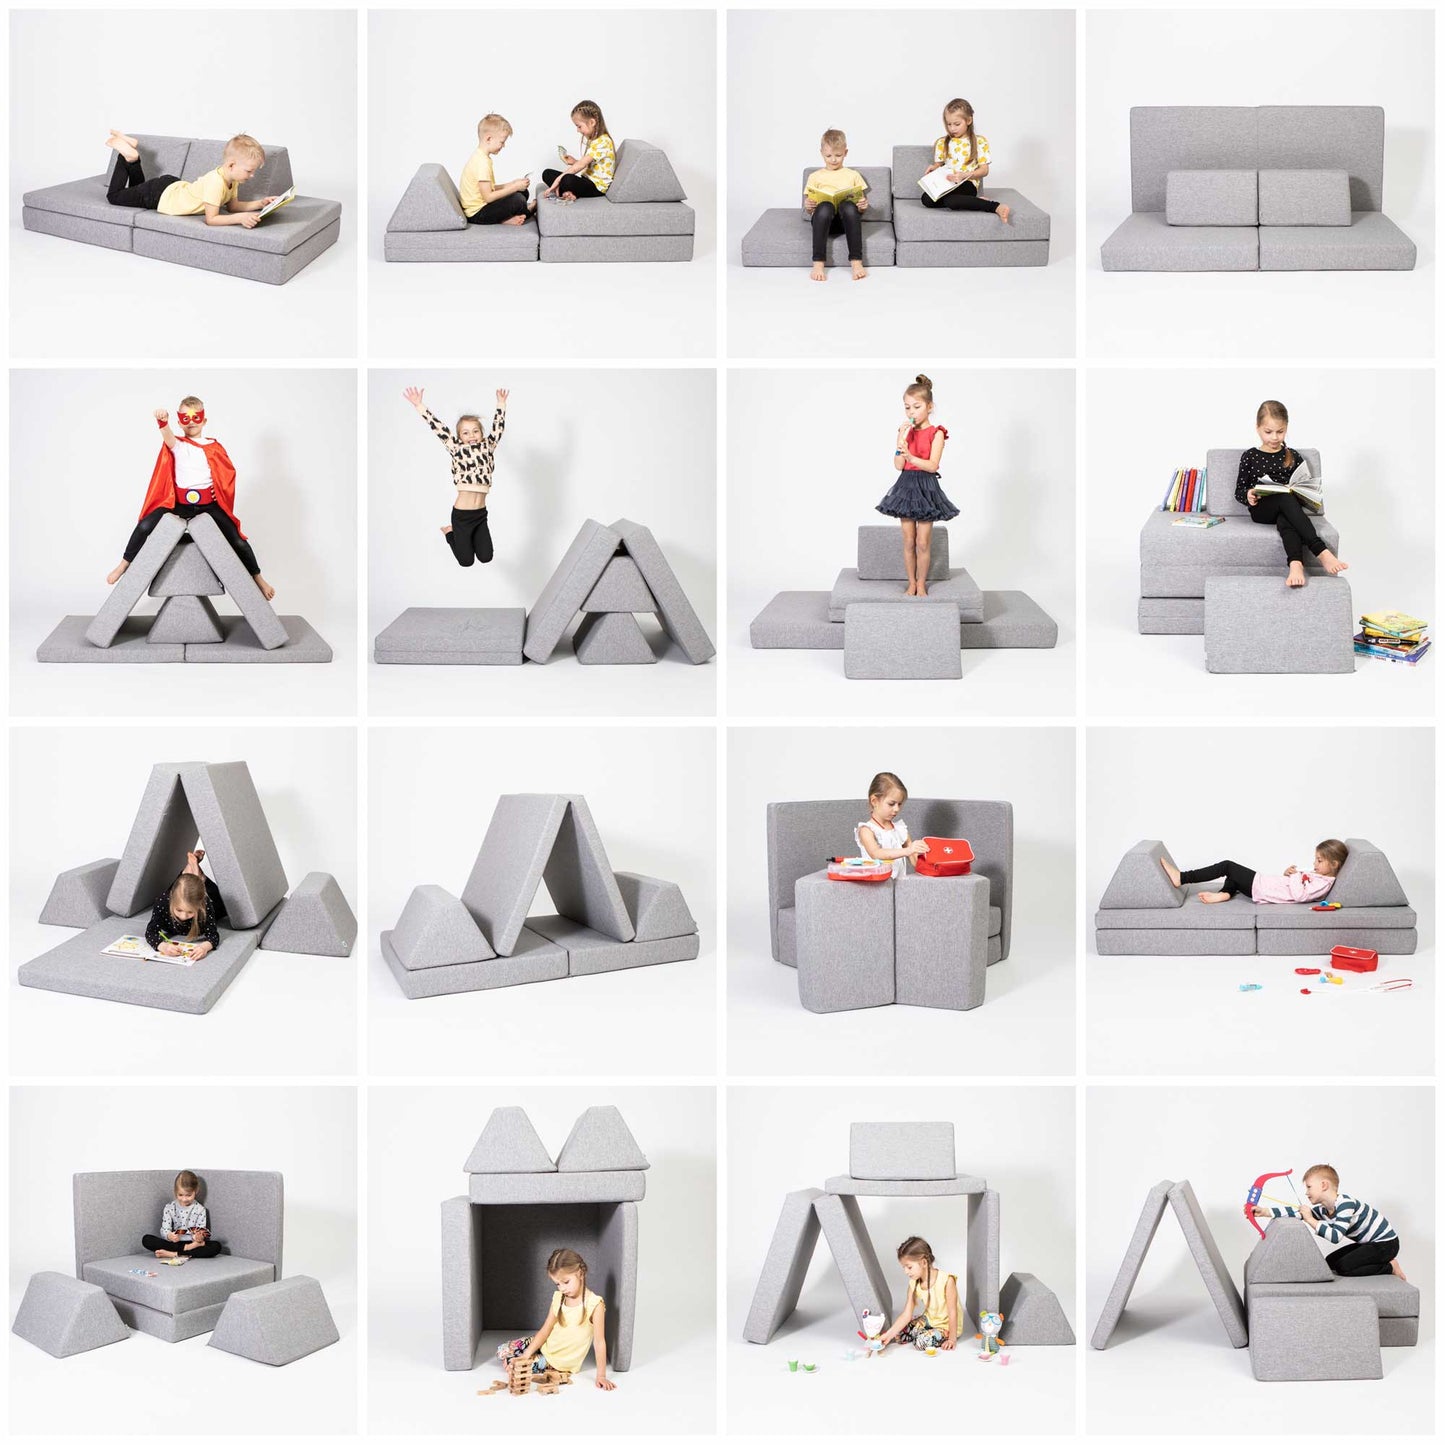 16 shape ideas for the grey Monboxy activity couch set